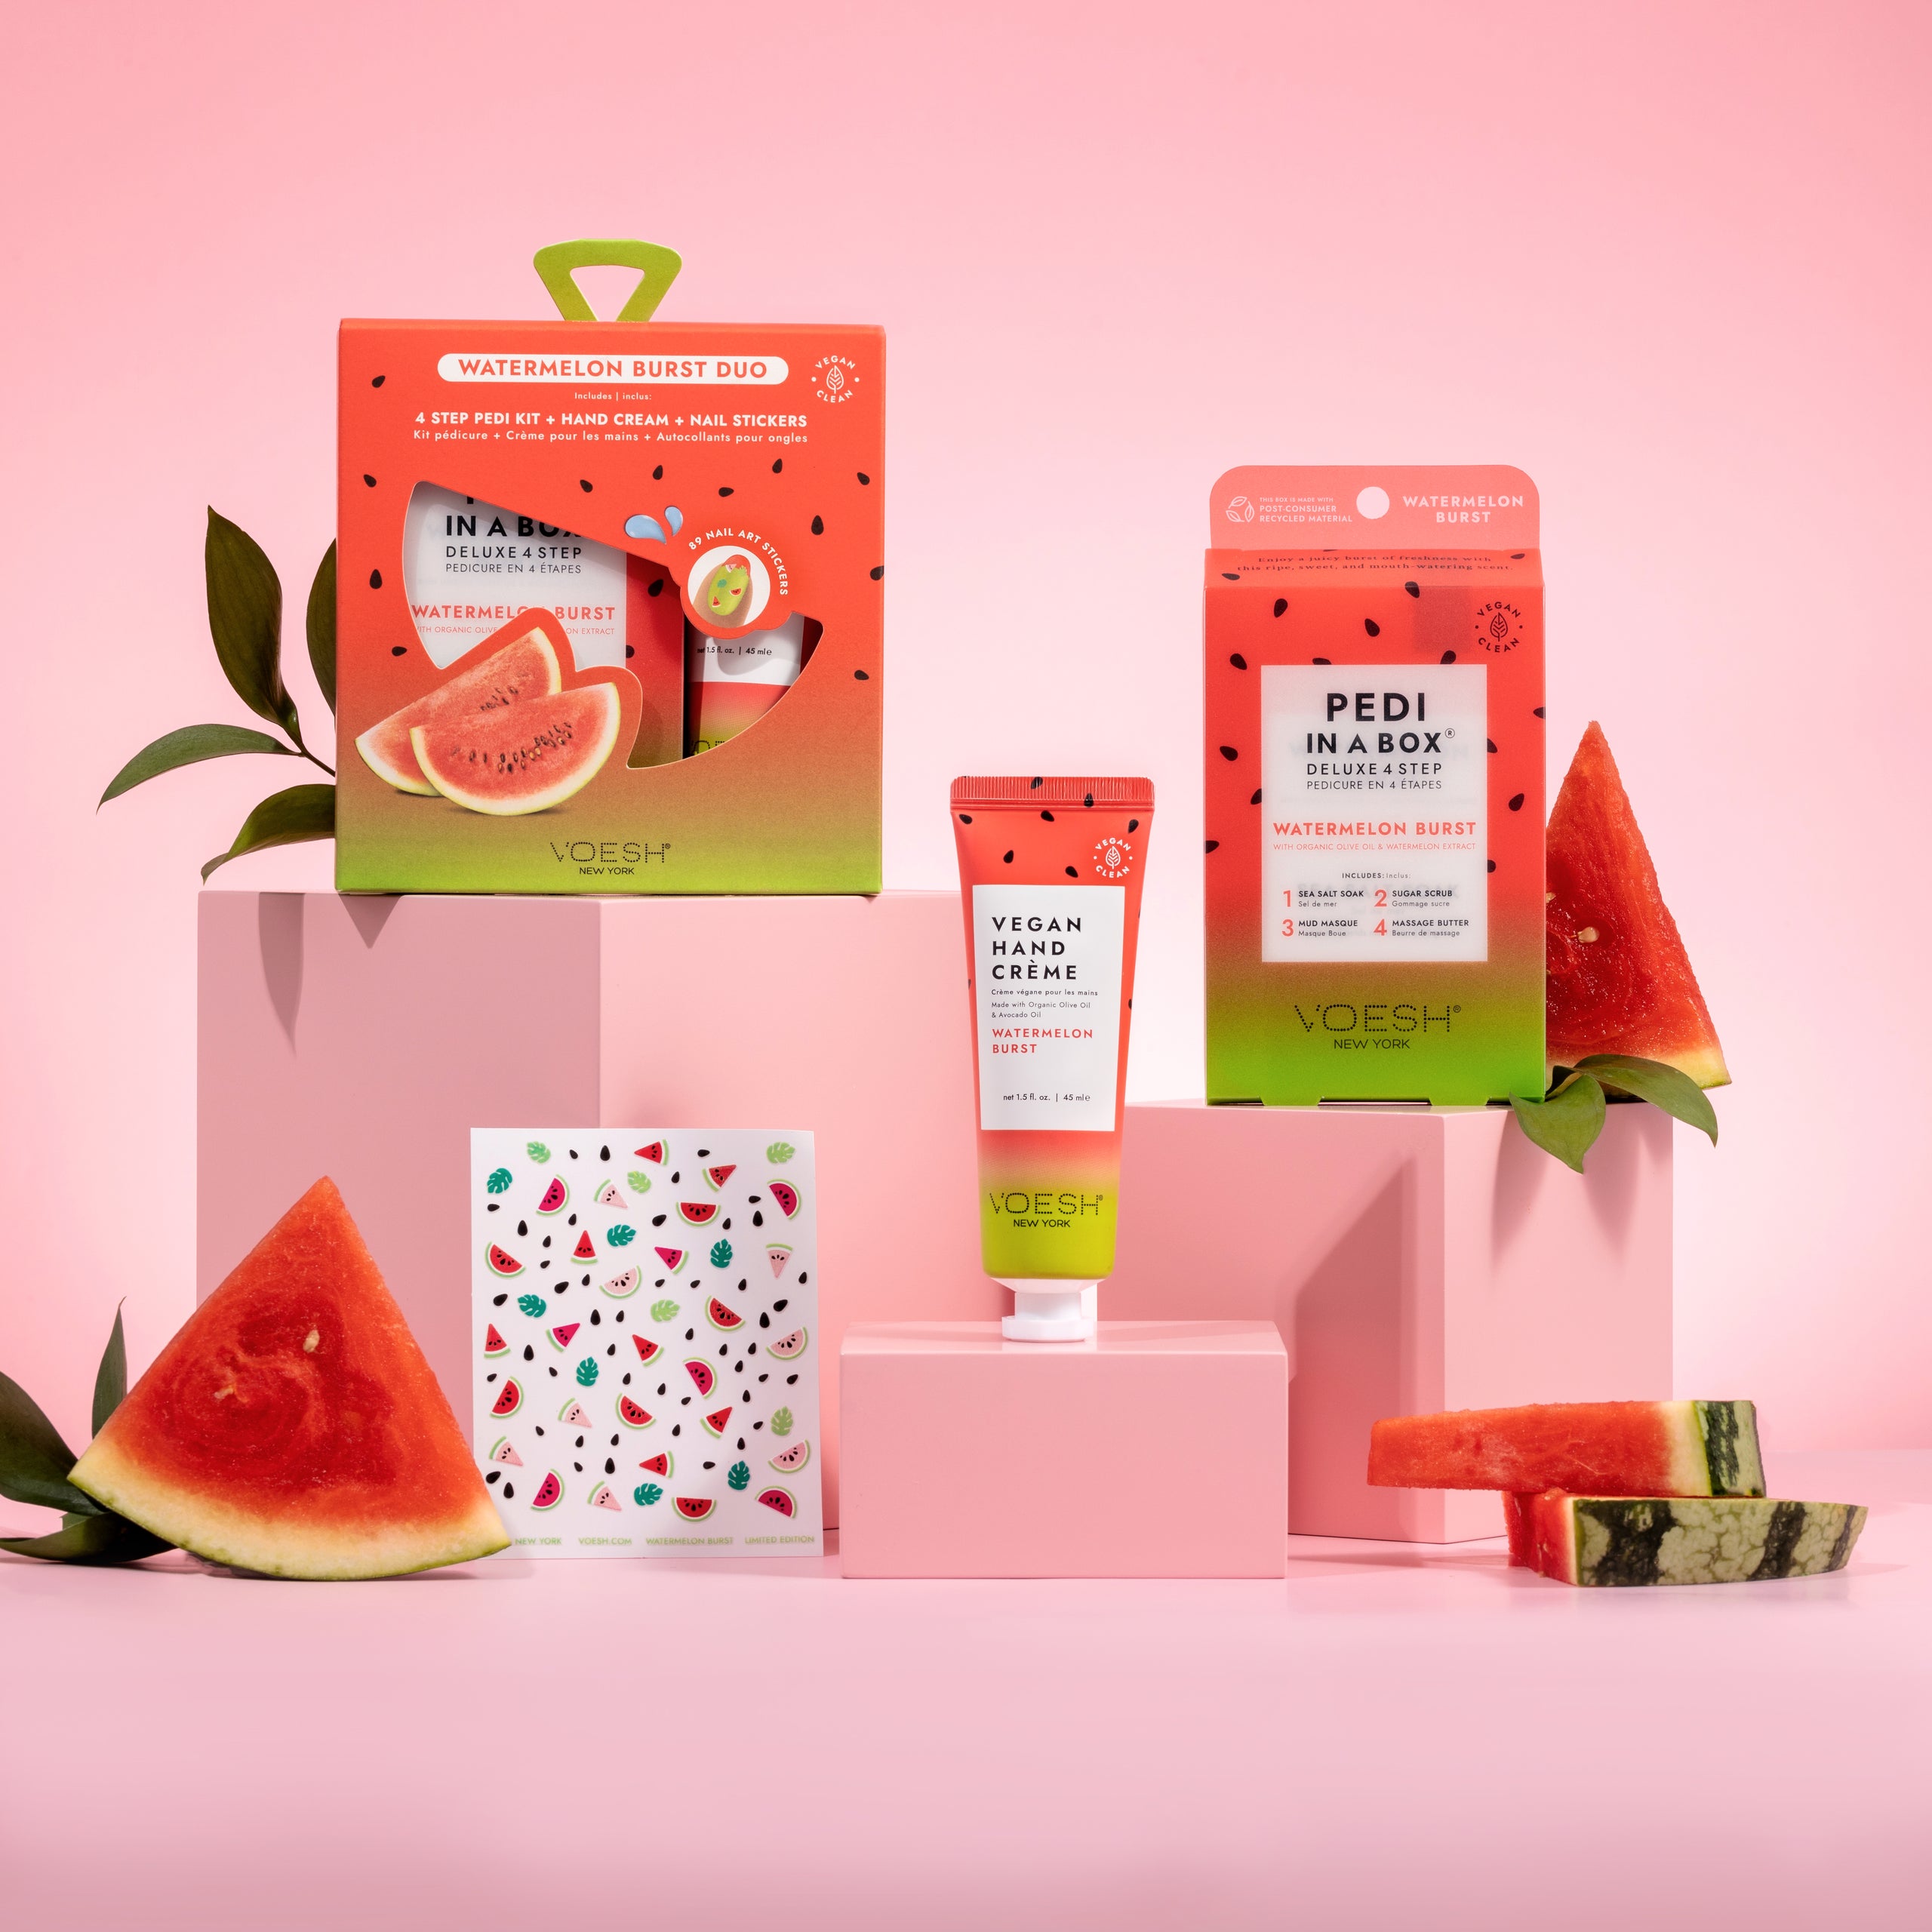 VOESH Limited Edition Watermelon Burst Collection featuring Pedi in a Box Deluxe 4 Step, Vegan Hand Crème, and Duo Kit.